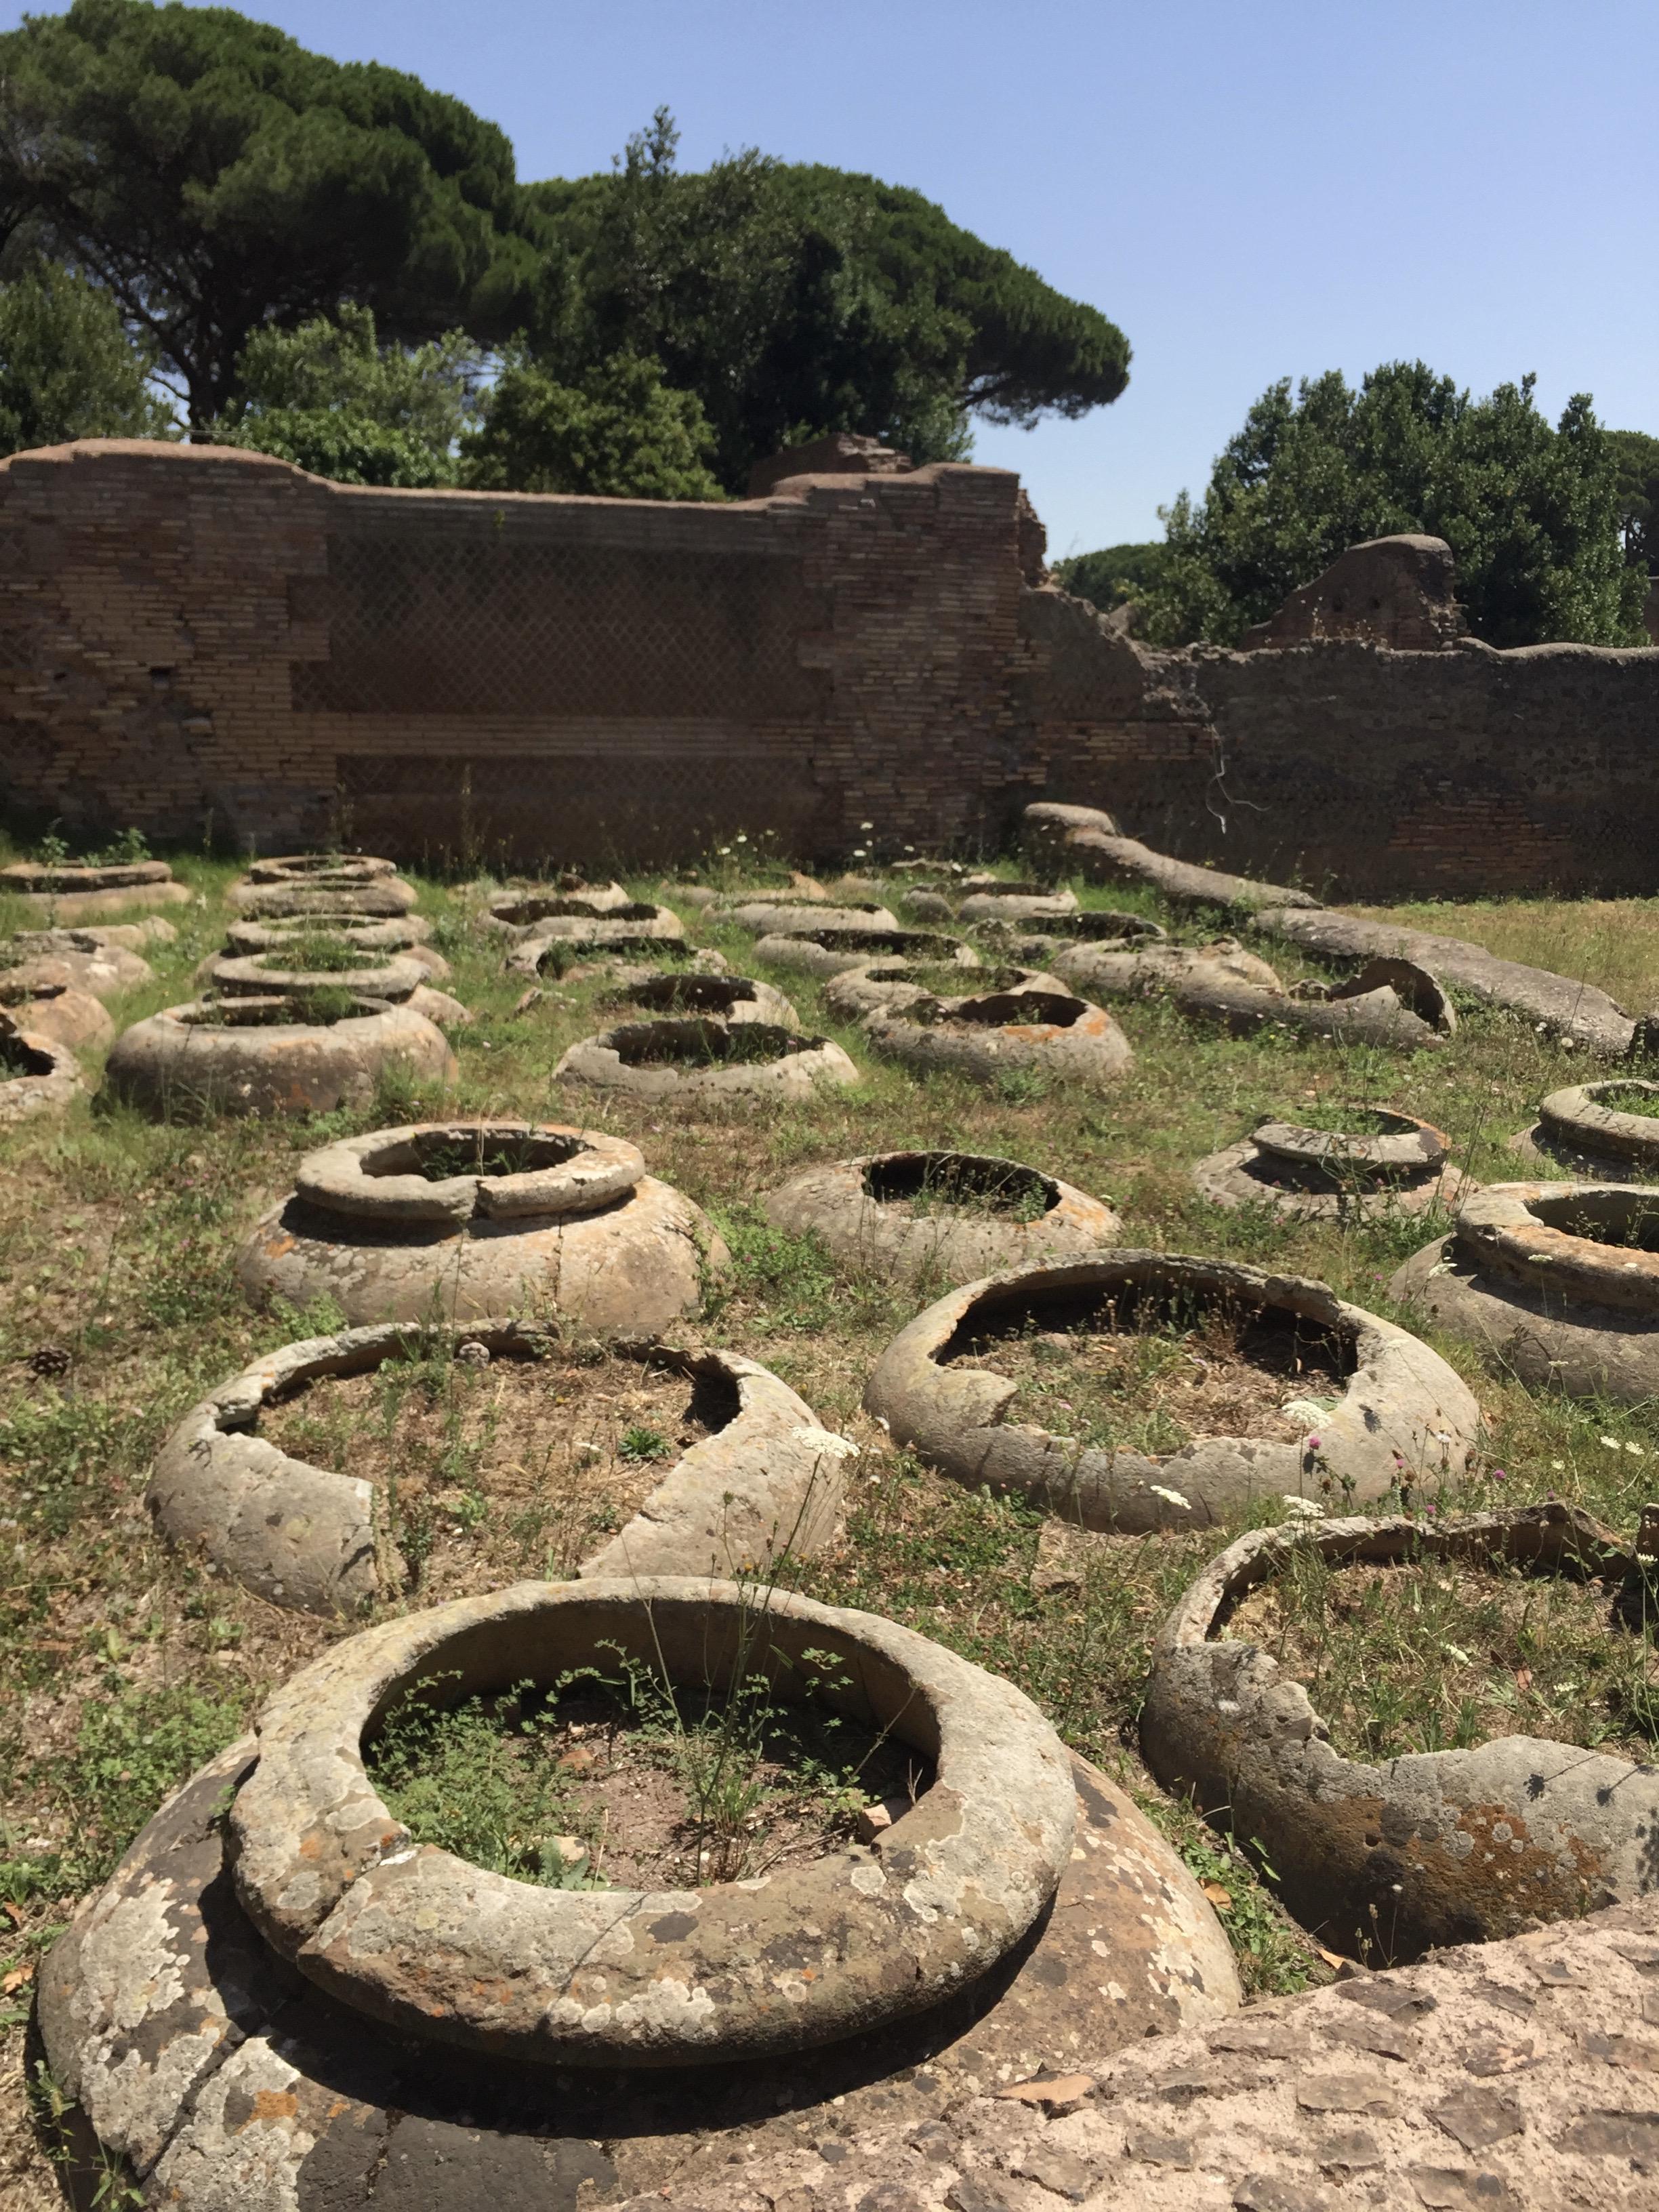 With 35 large jars (dolia) buried inside the floor, this Roman building likely served as a repository for olive oil or wine. It was first built around 130-145 CE, but remained in use until the 5th century. Ostia, Italy.